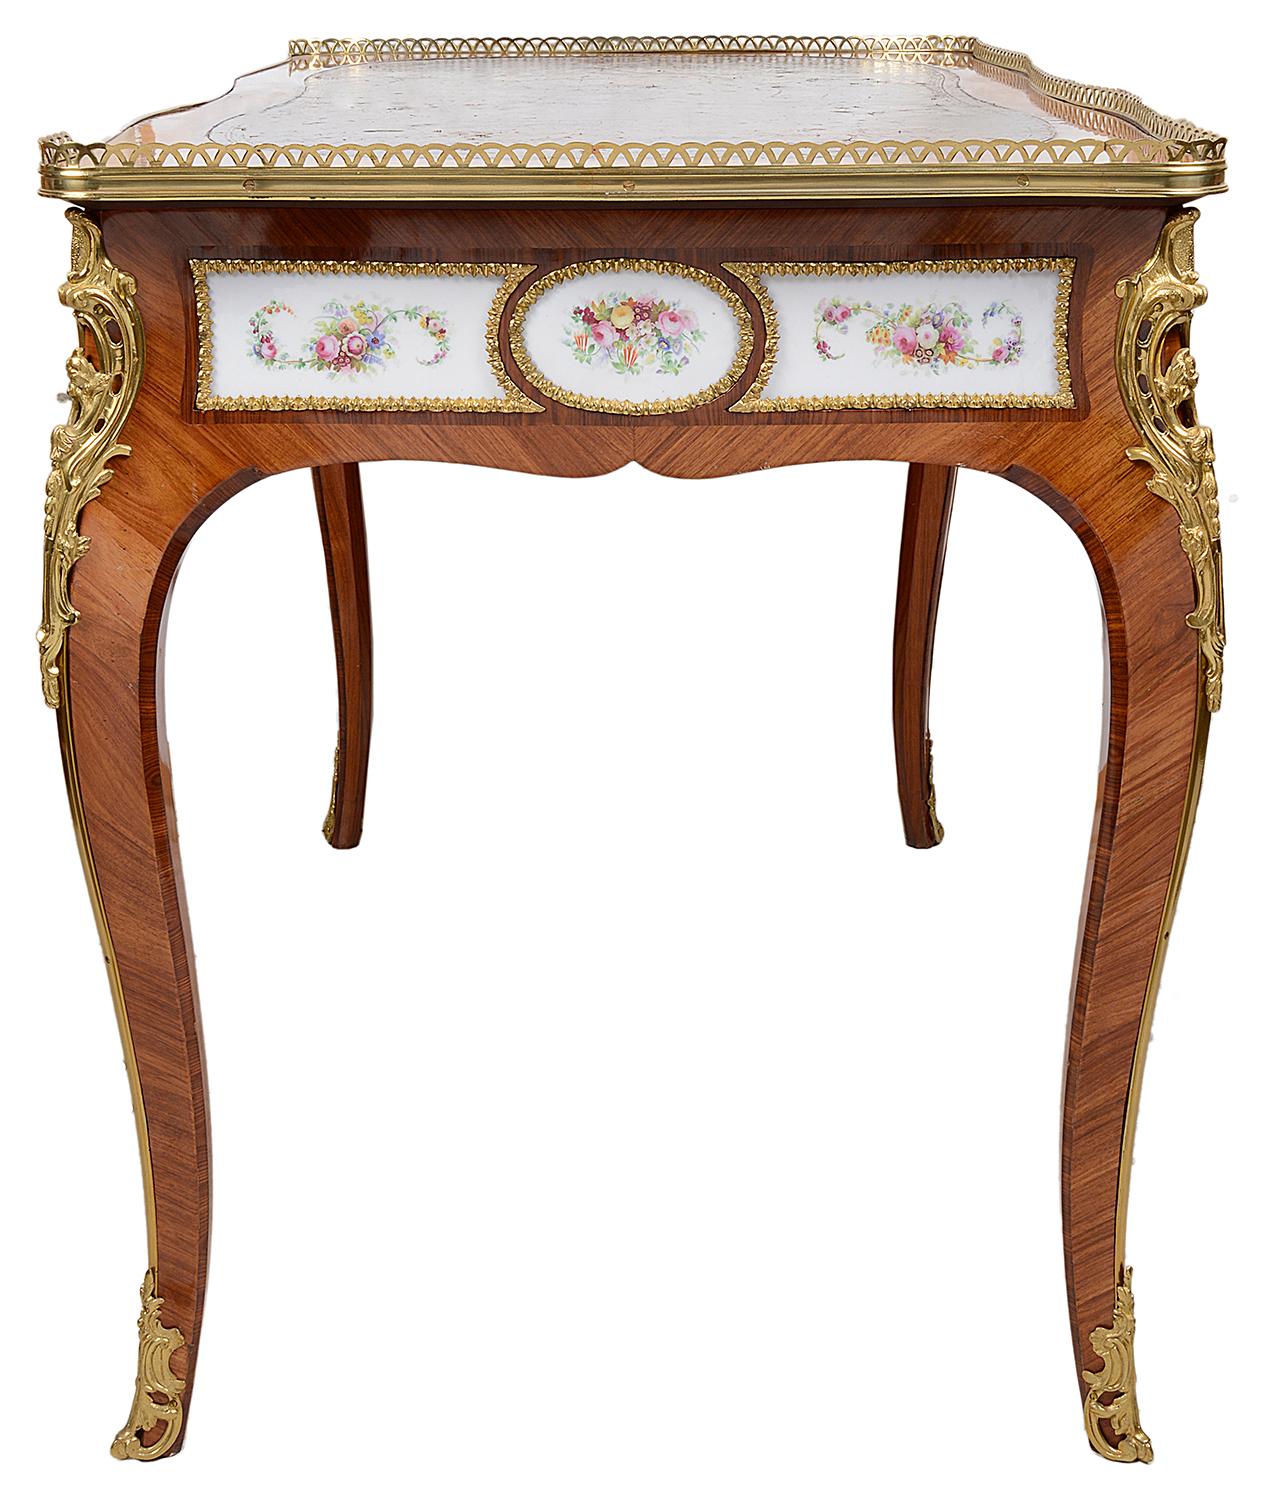 19th Century French Porcelain Mounted Ladies Writing Desk For Sale 1